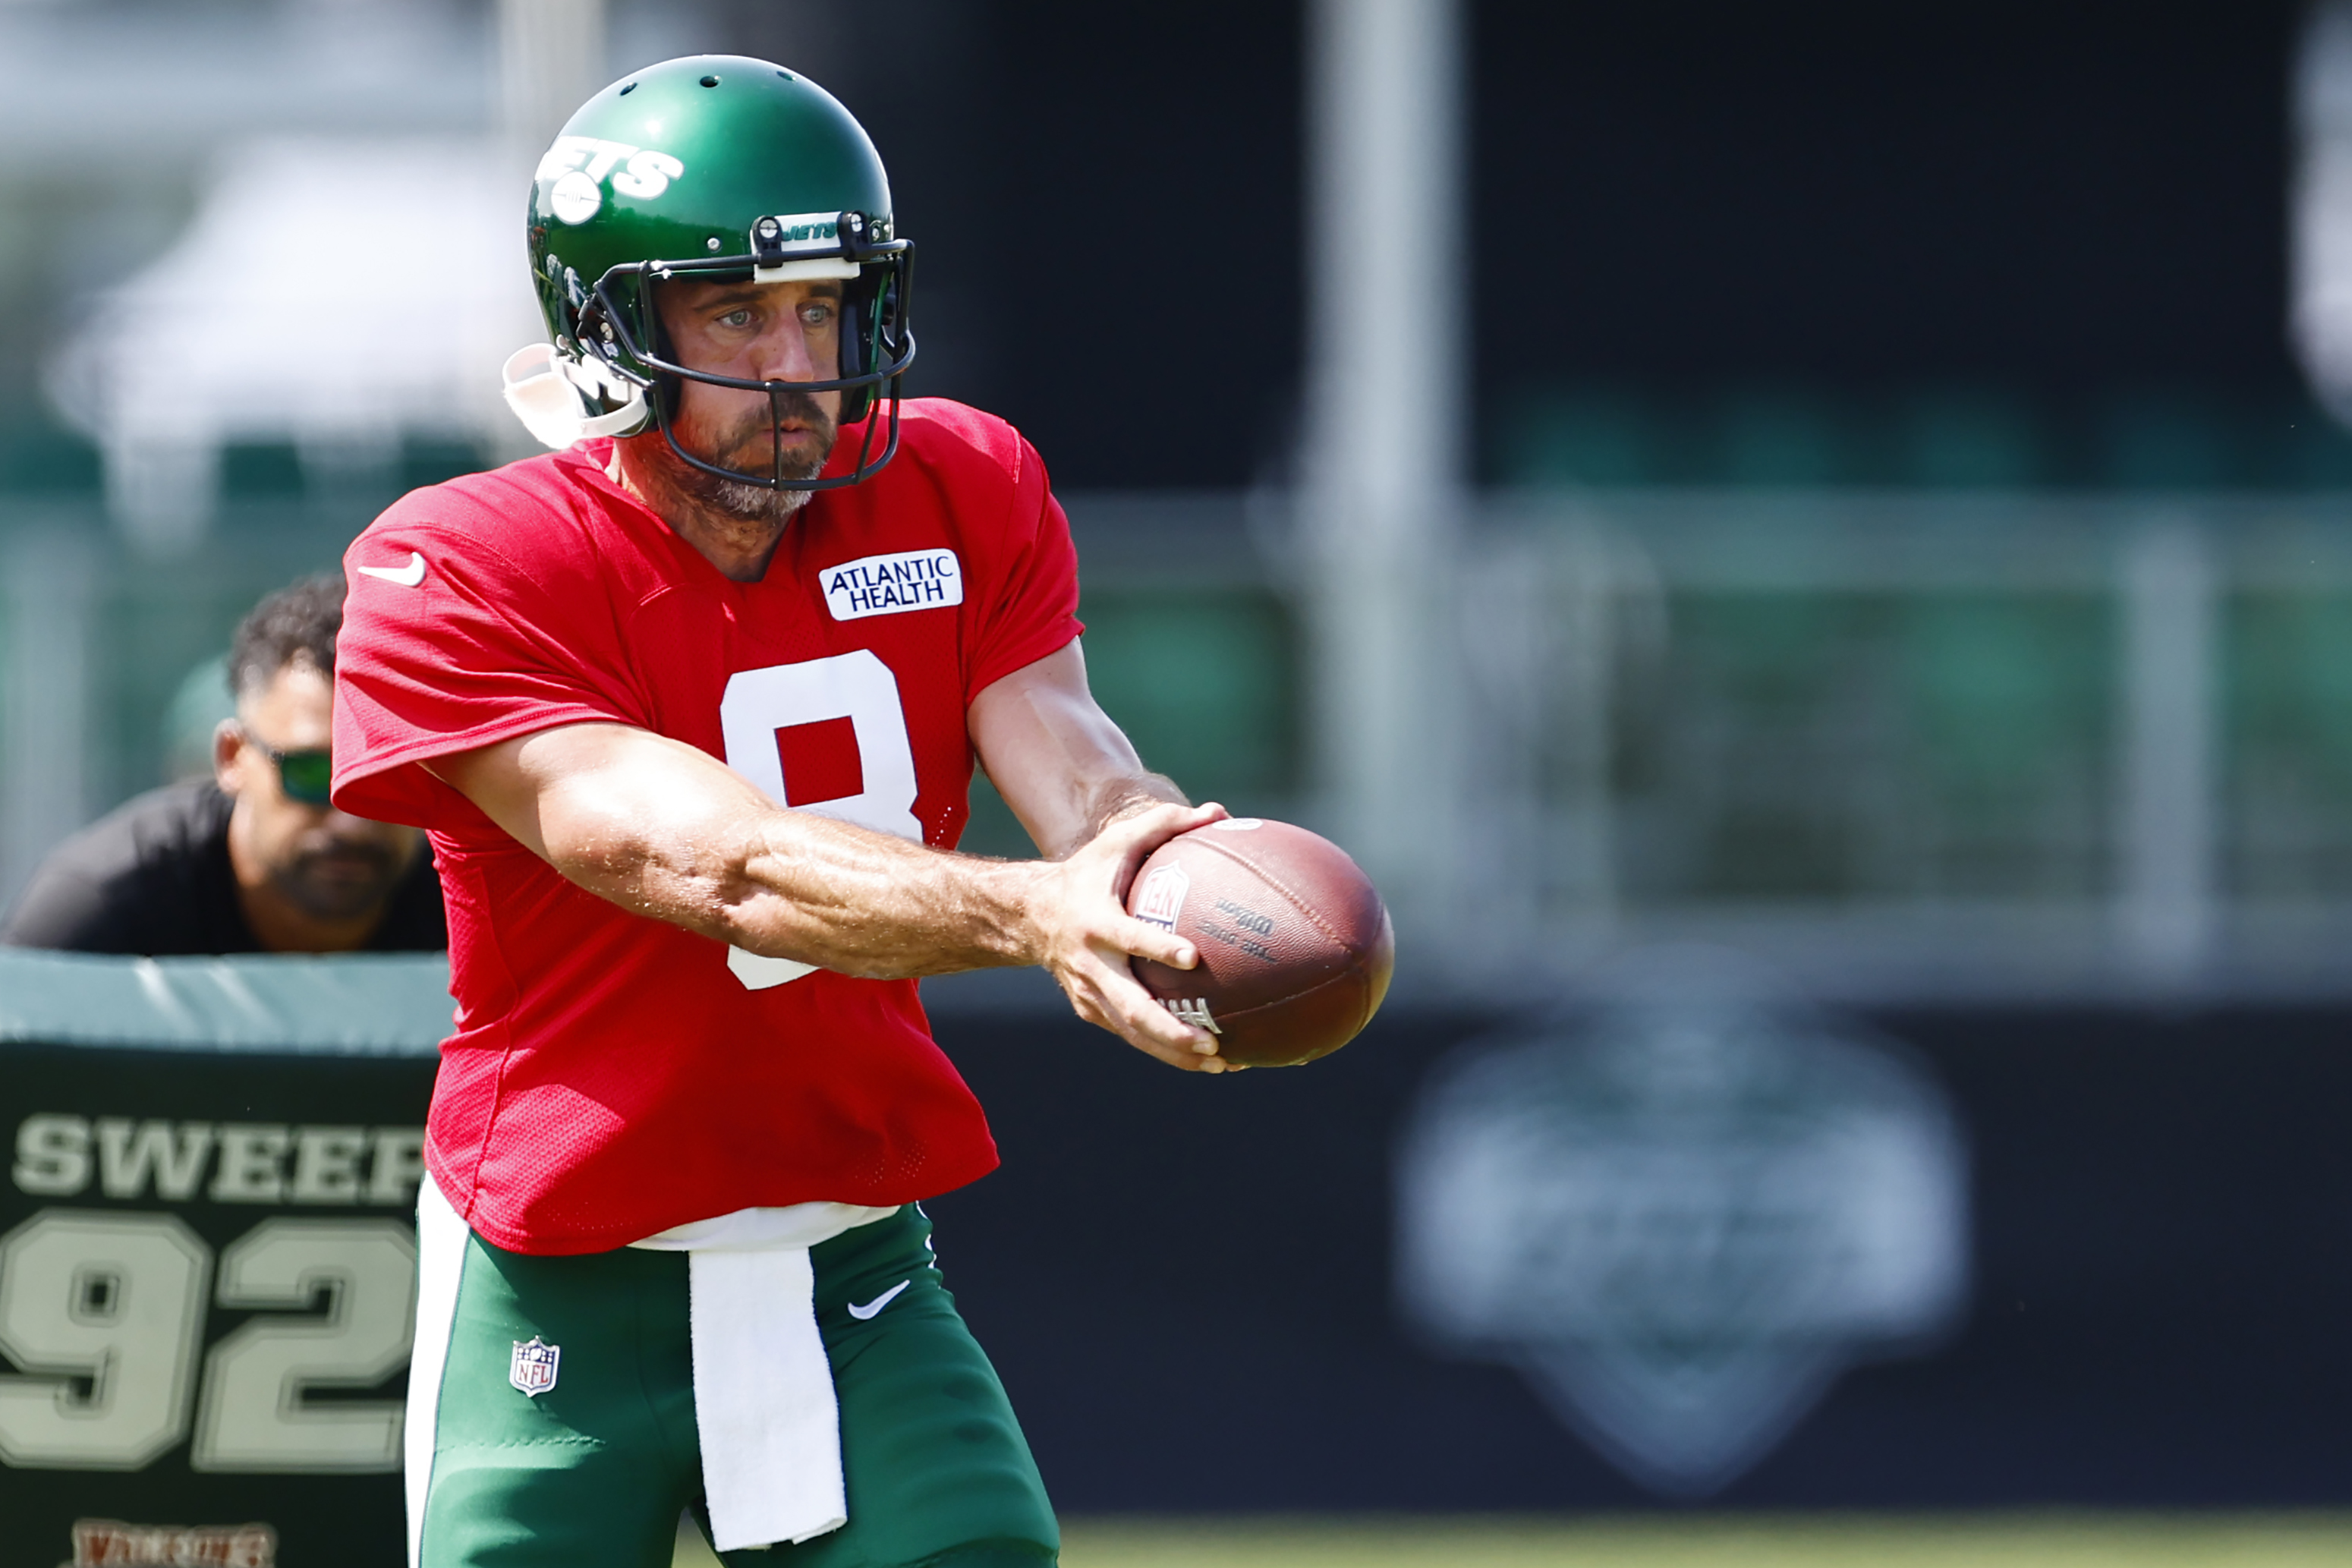 Aaron Rodgers in Jets jersey looks super weird